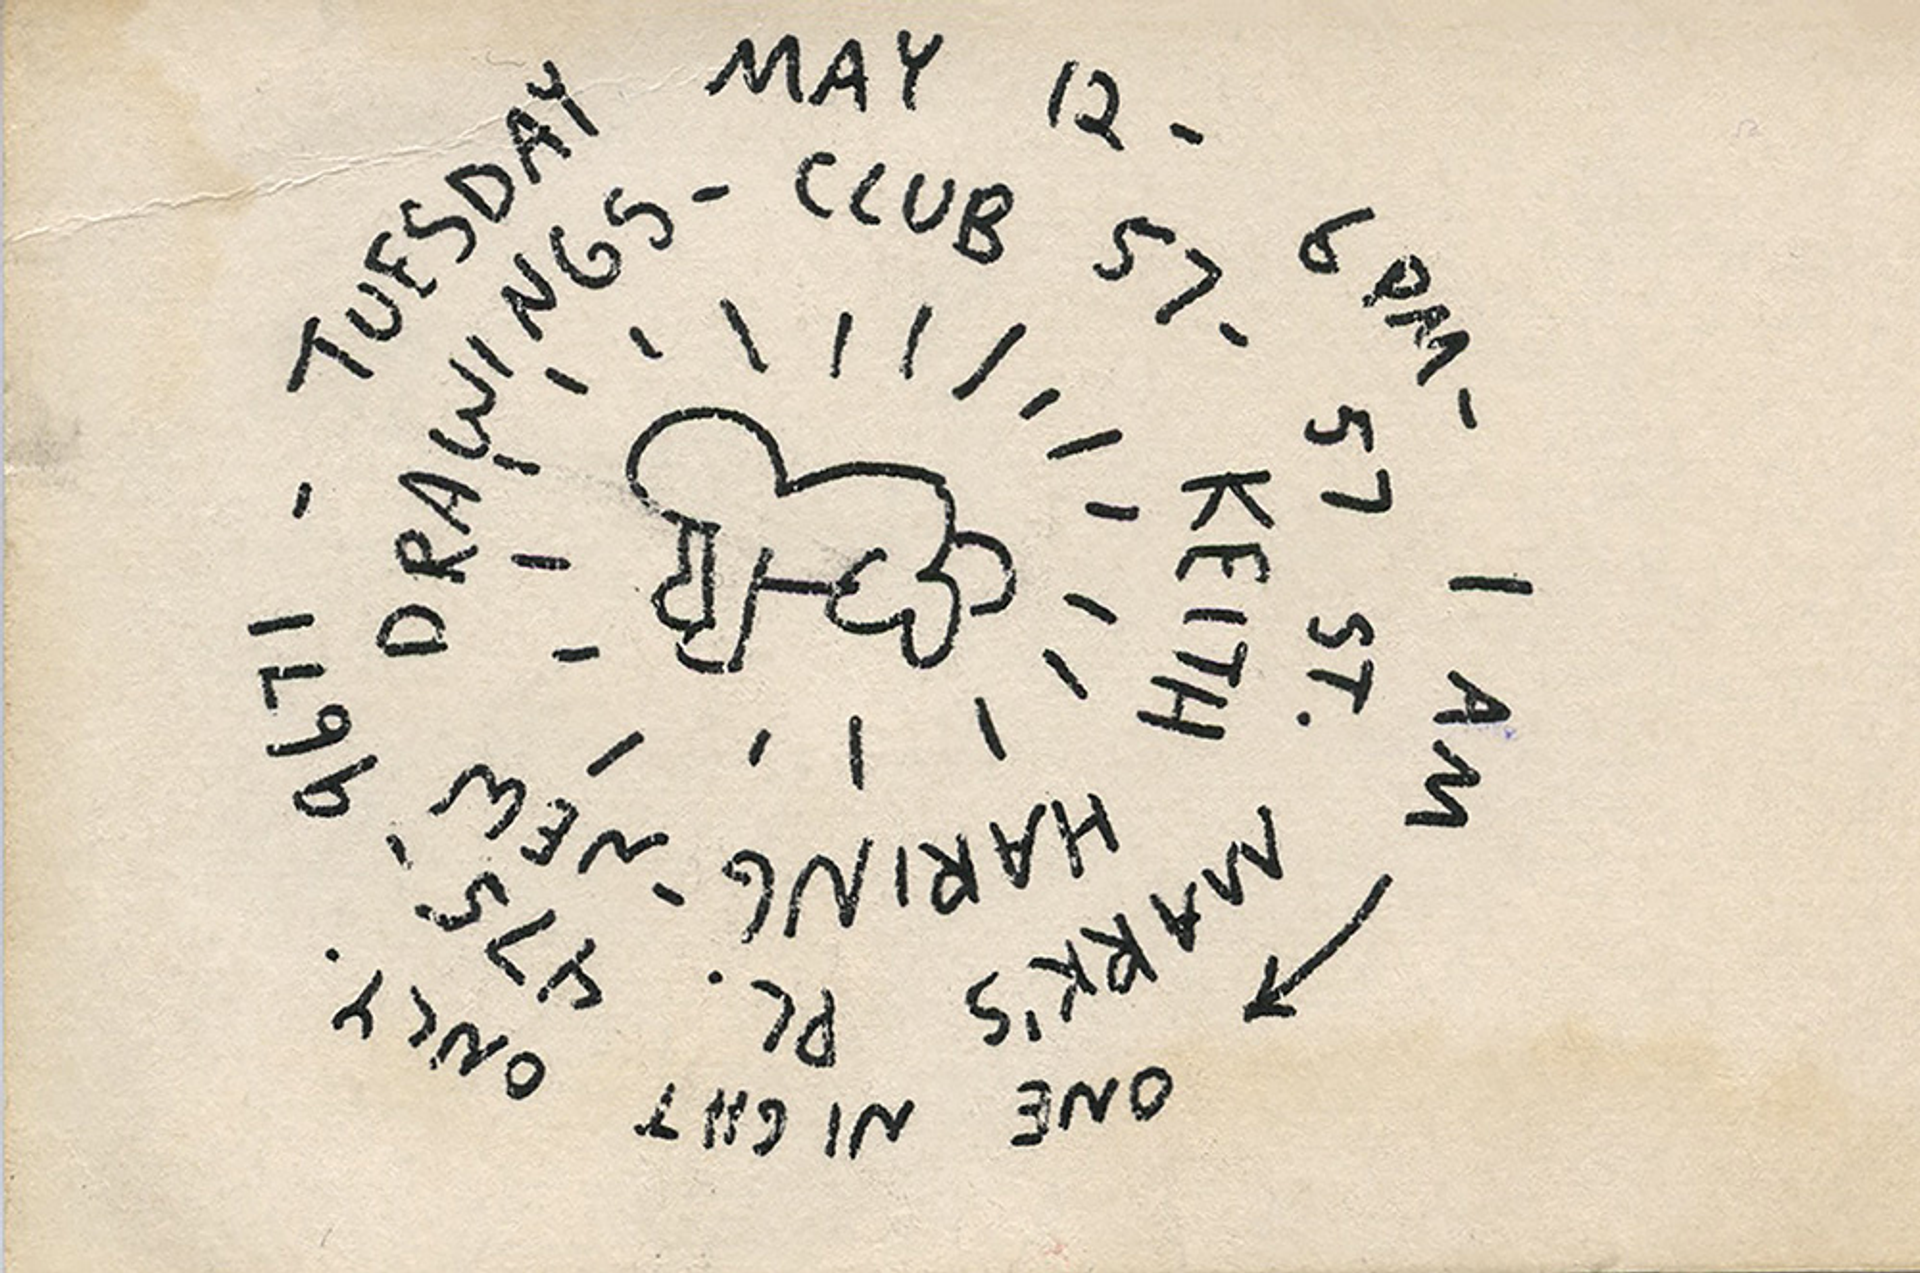 One of the thousands of flyers that Keith Haring made promoting Club 57, this one featuring one of his signature radiant babies, with spiral writing surrounding it.